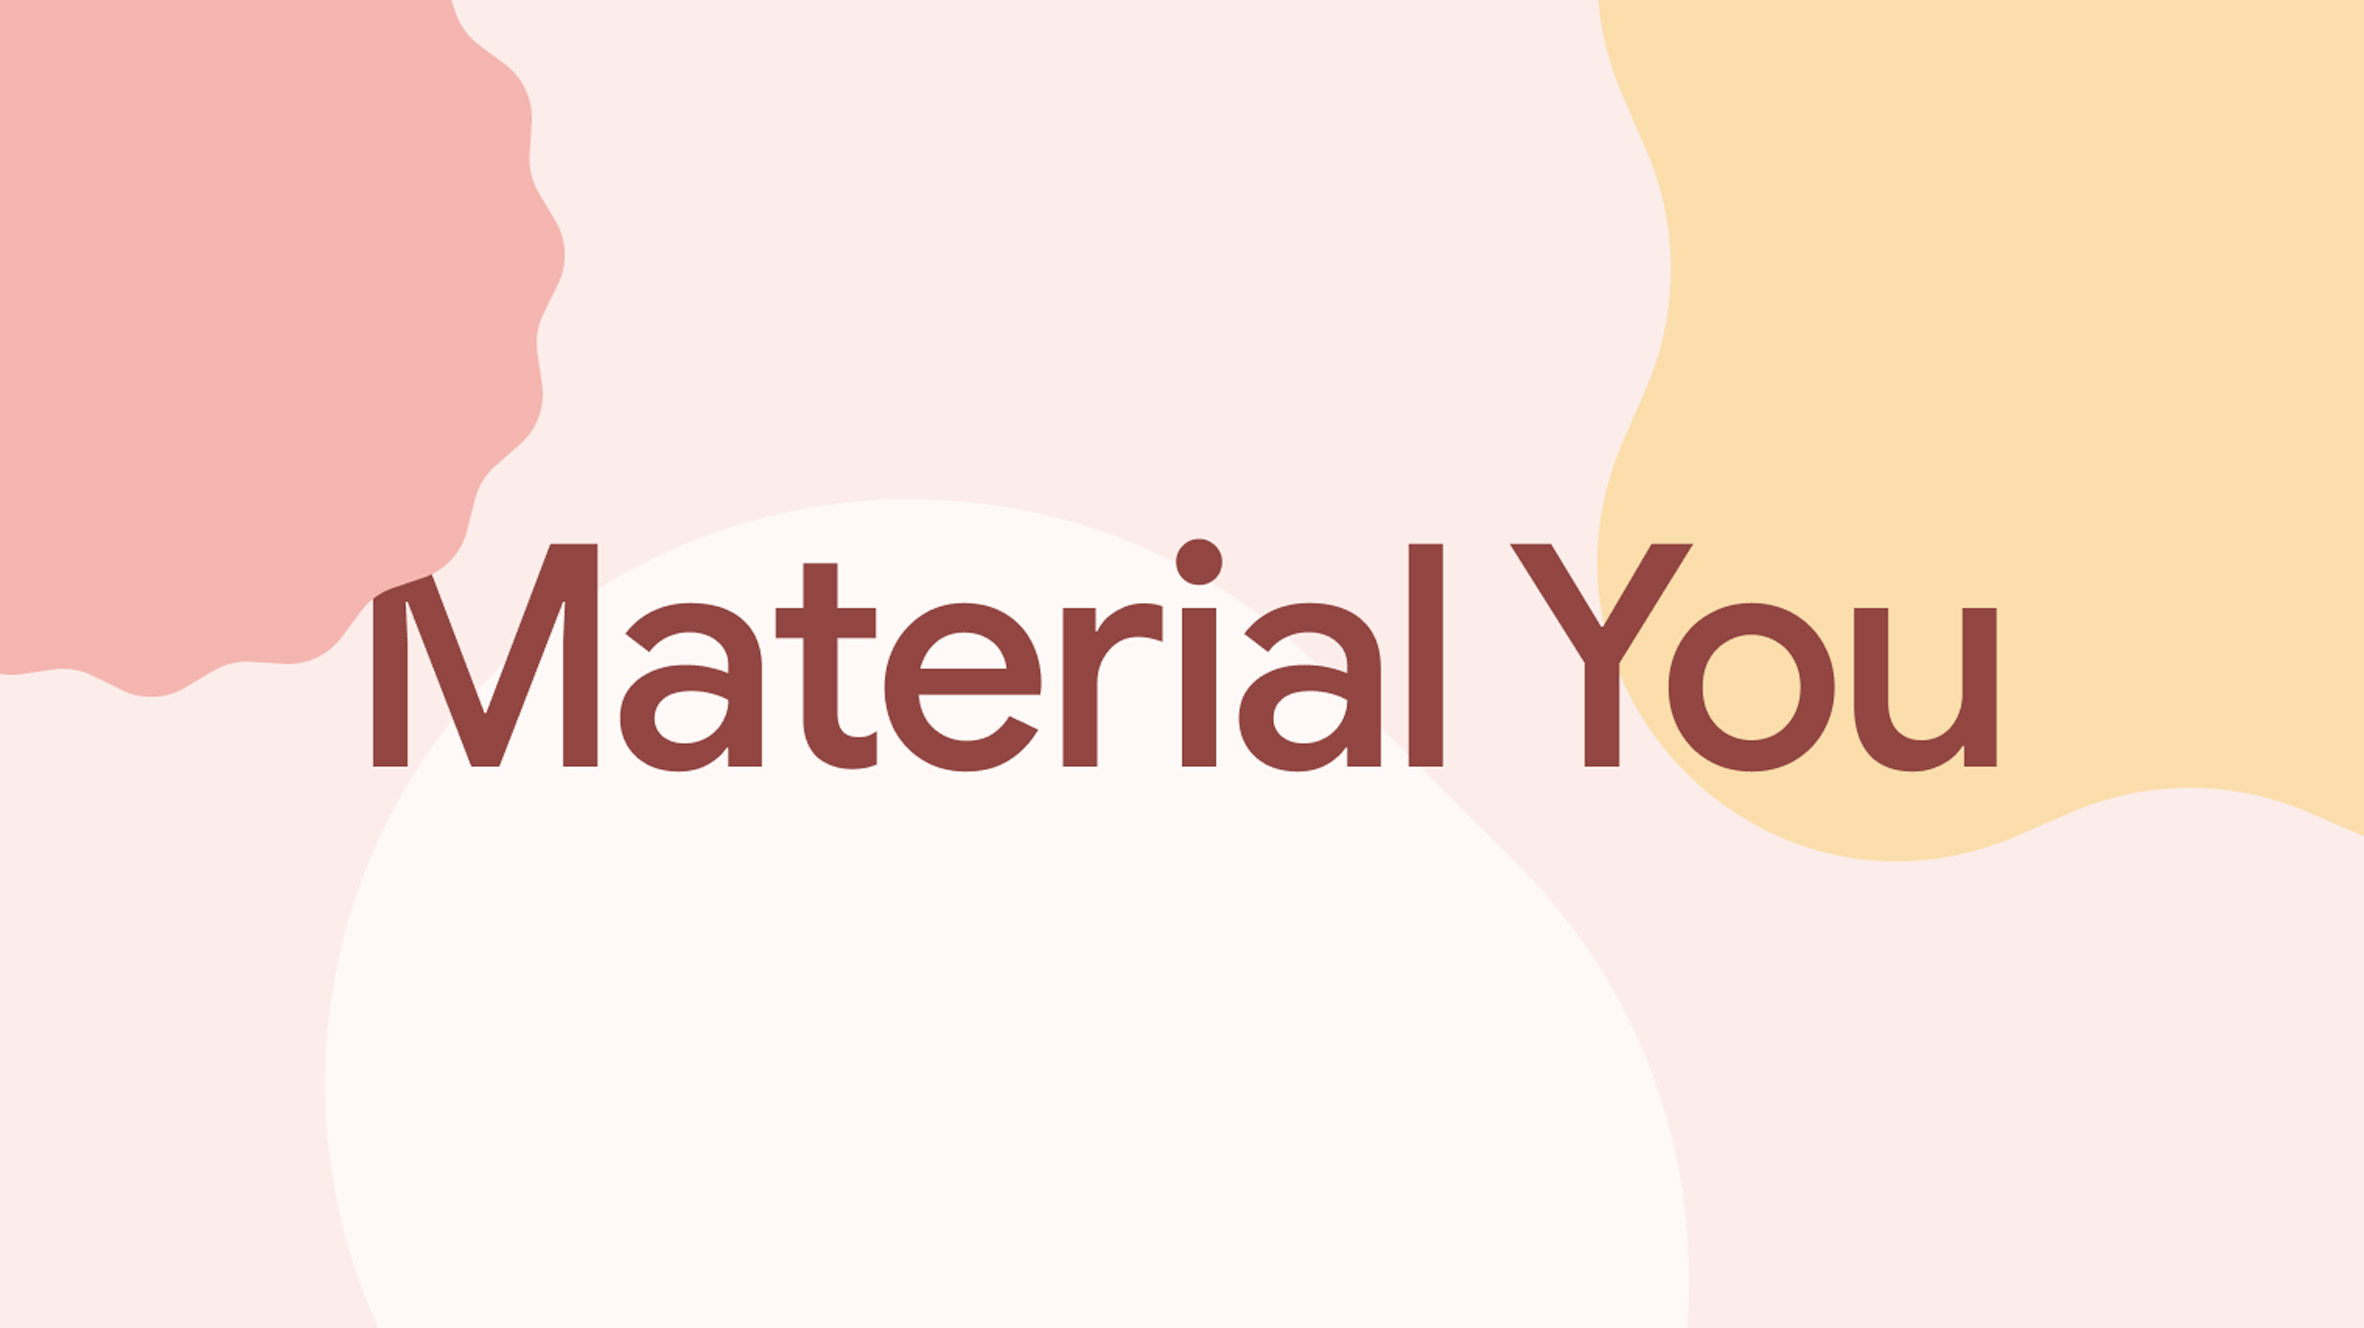 Material You by Google